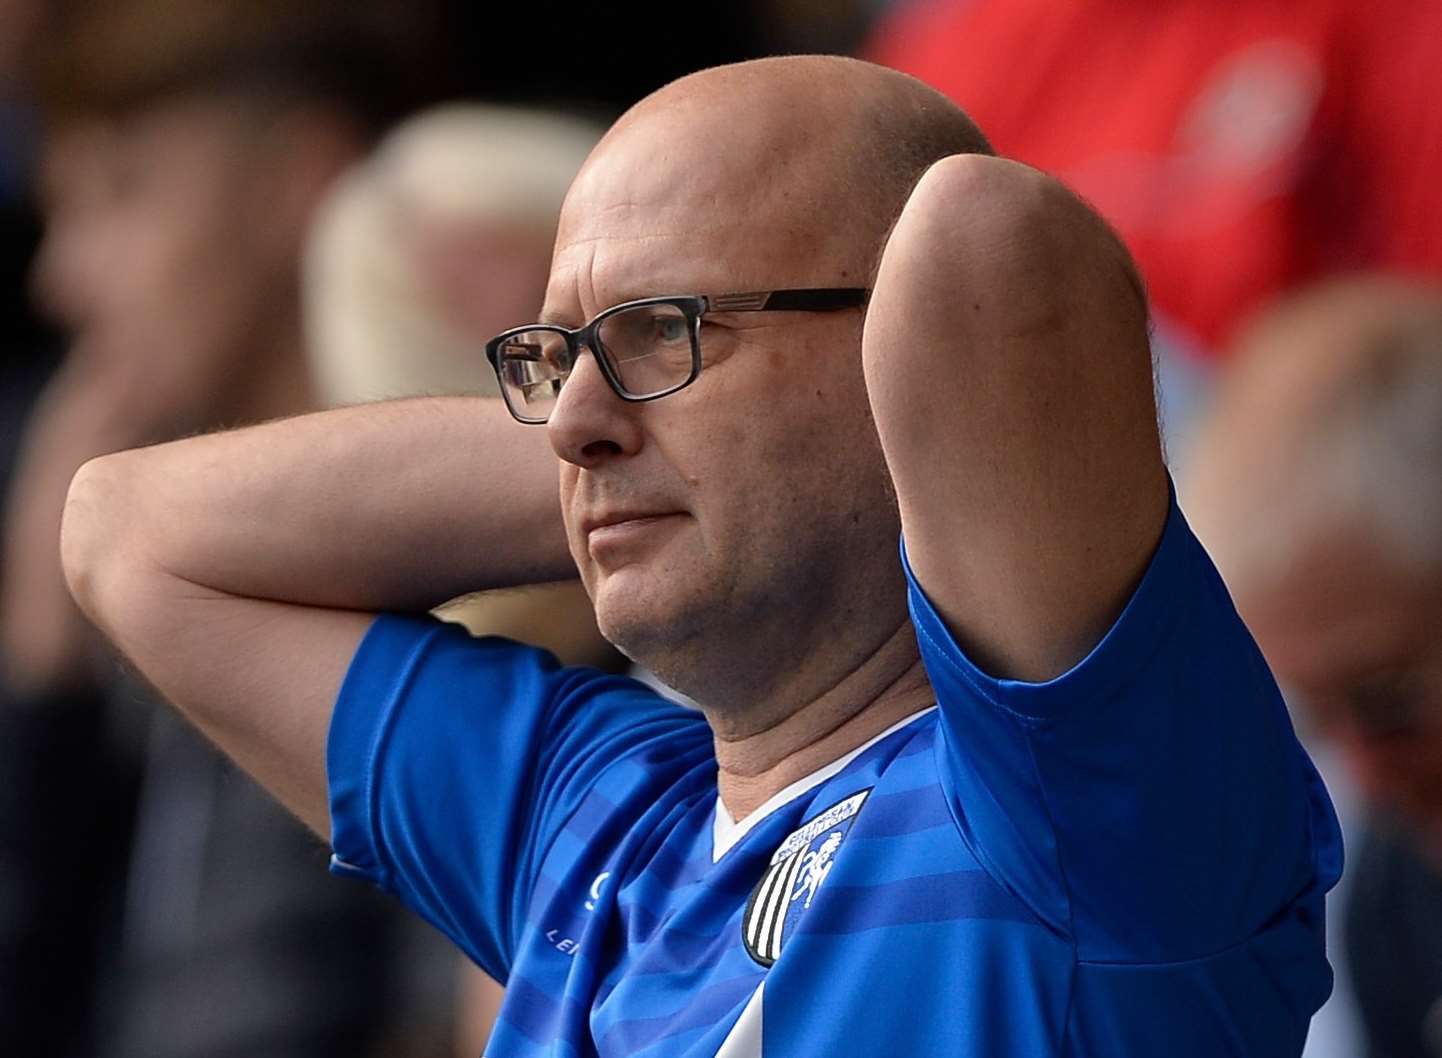 It was tough being a Gills fan at MK Dons on Saturday. Picture: Ady Kerry